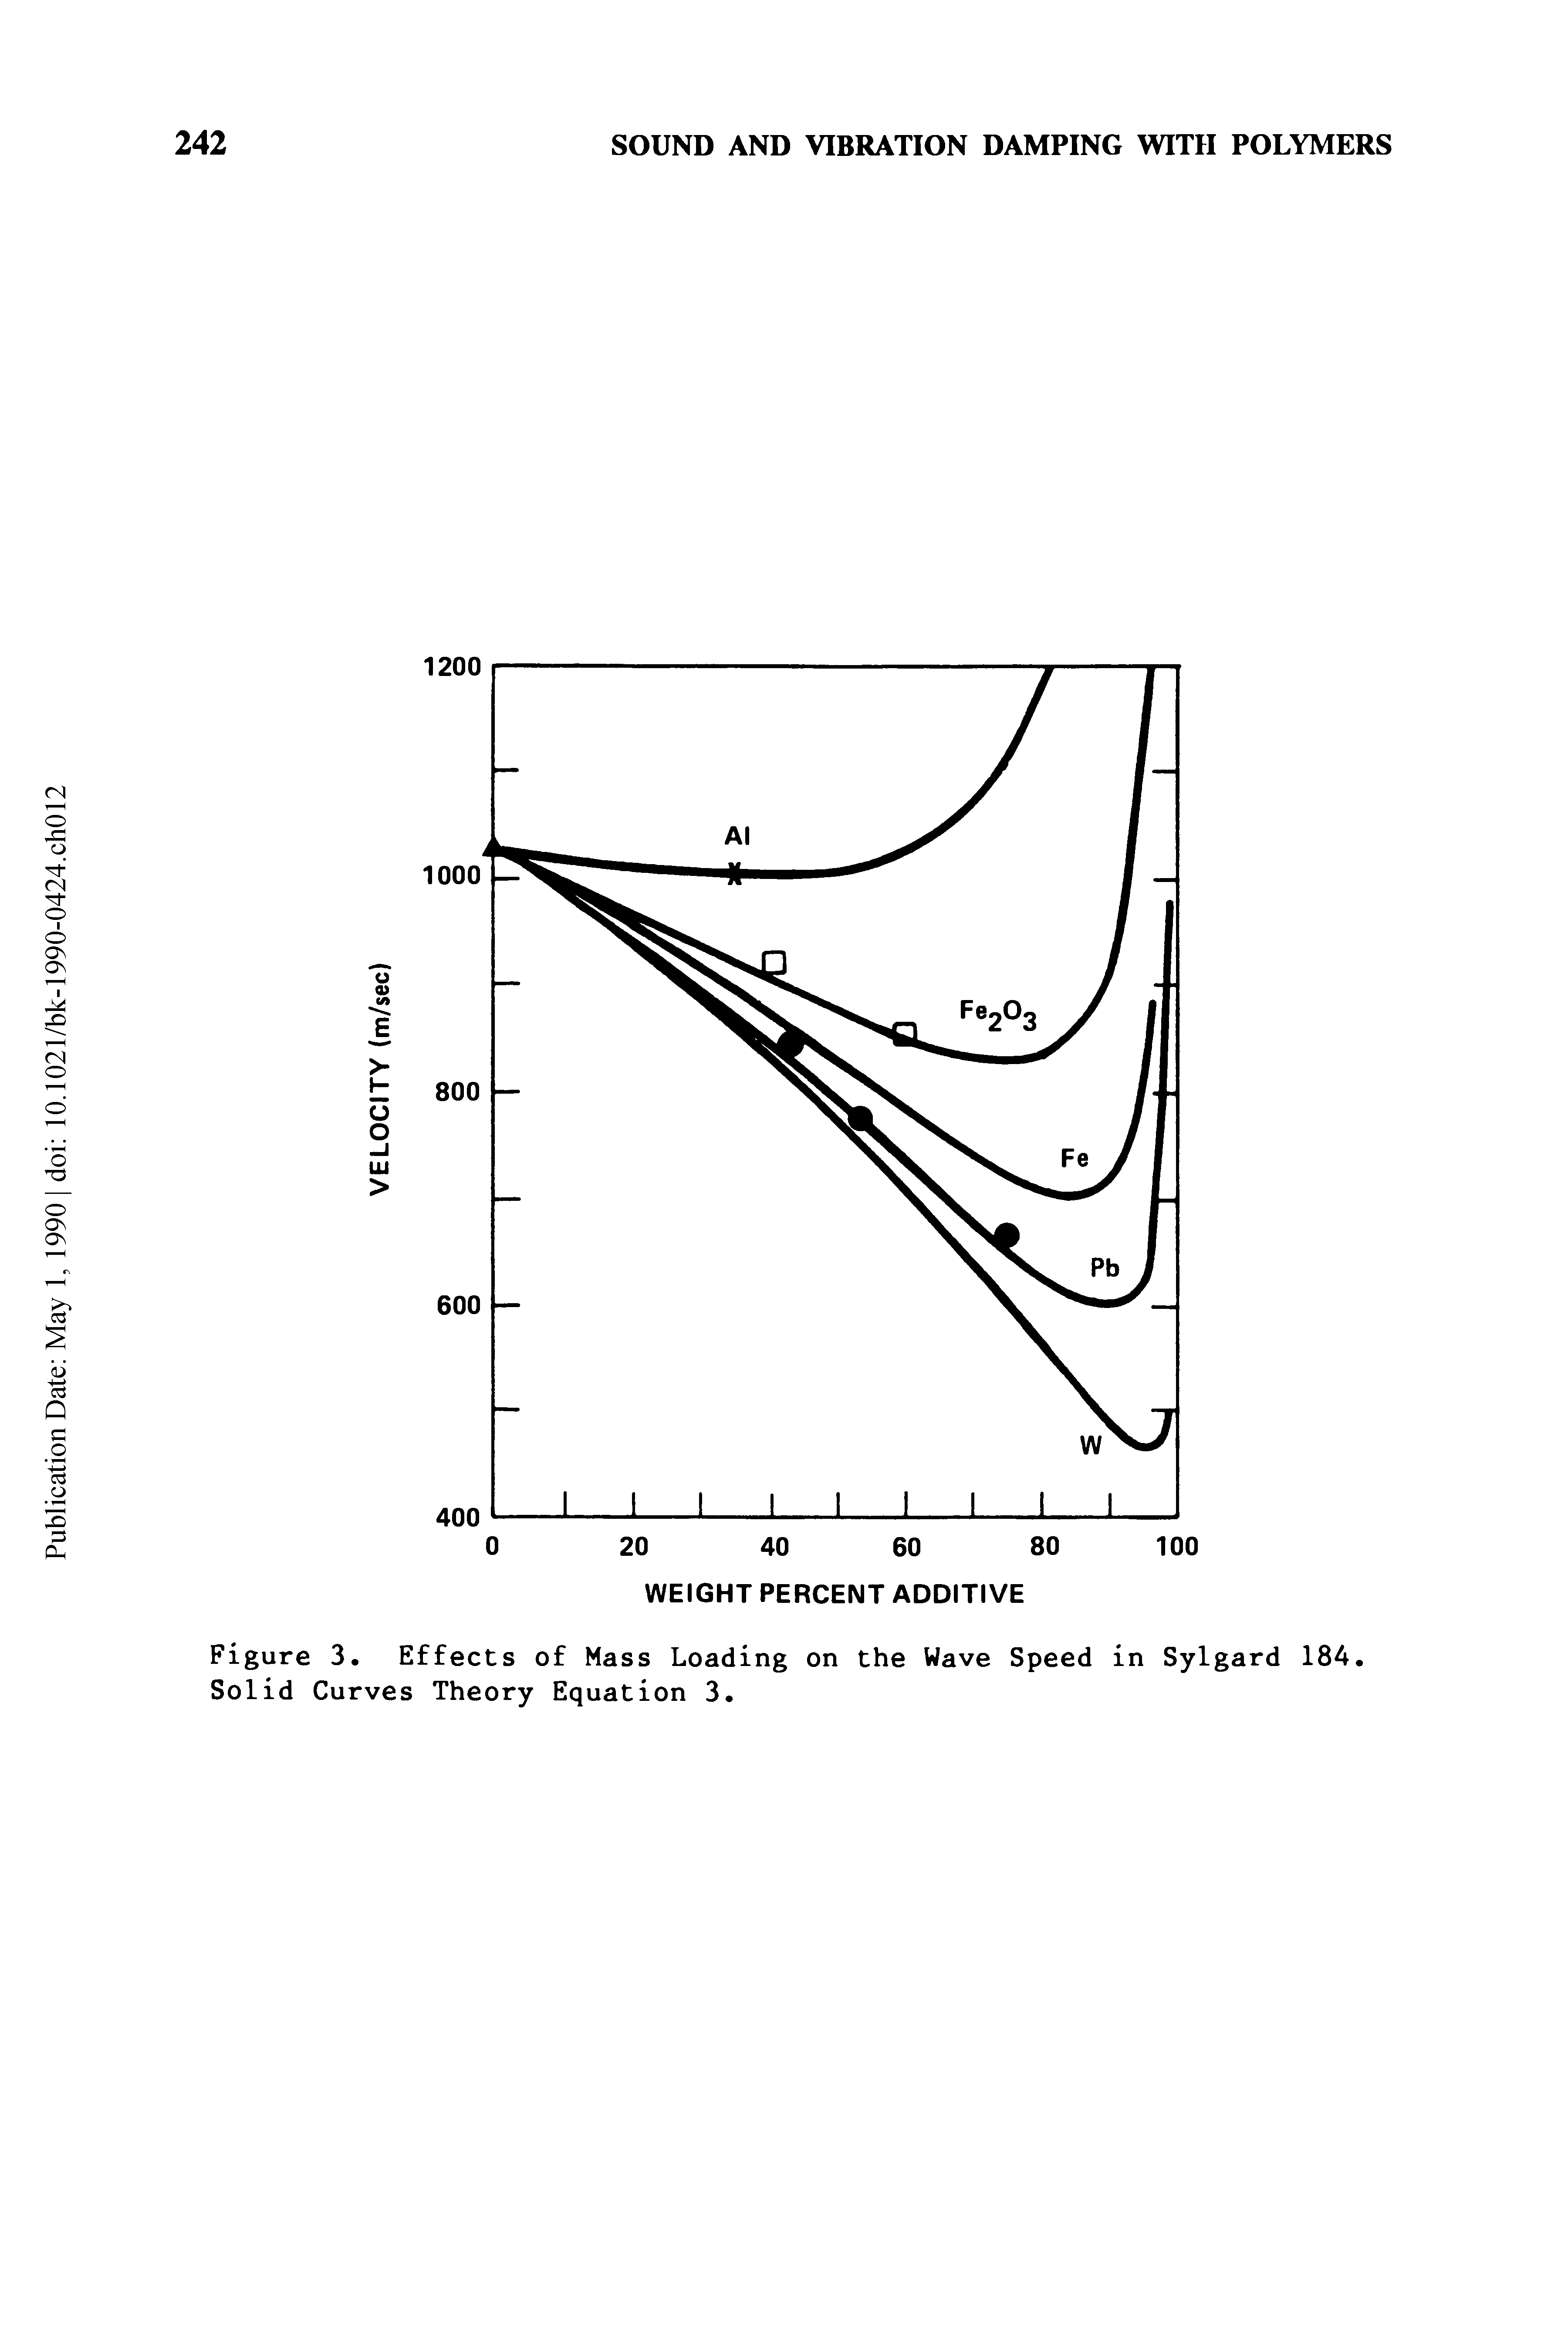 Figure 3. Effects of Mass Loading on the Wave Speed in Sylgard 18A. Solid Curves Theory Equation 3,...